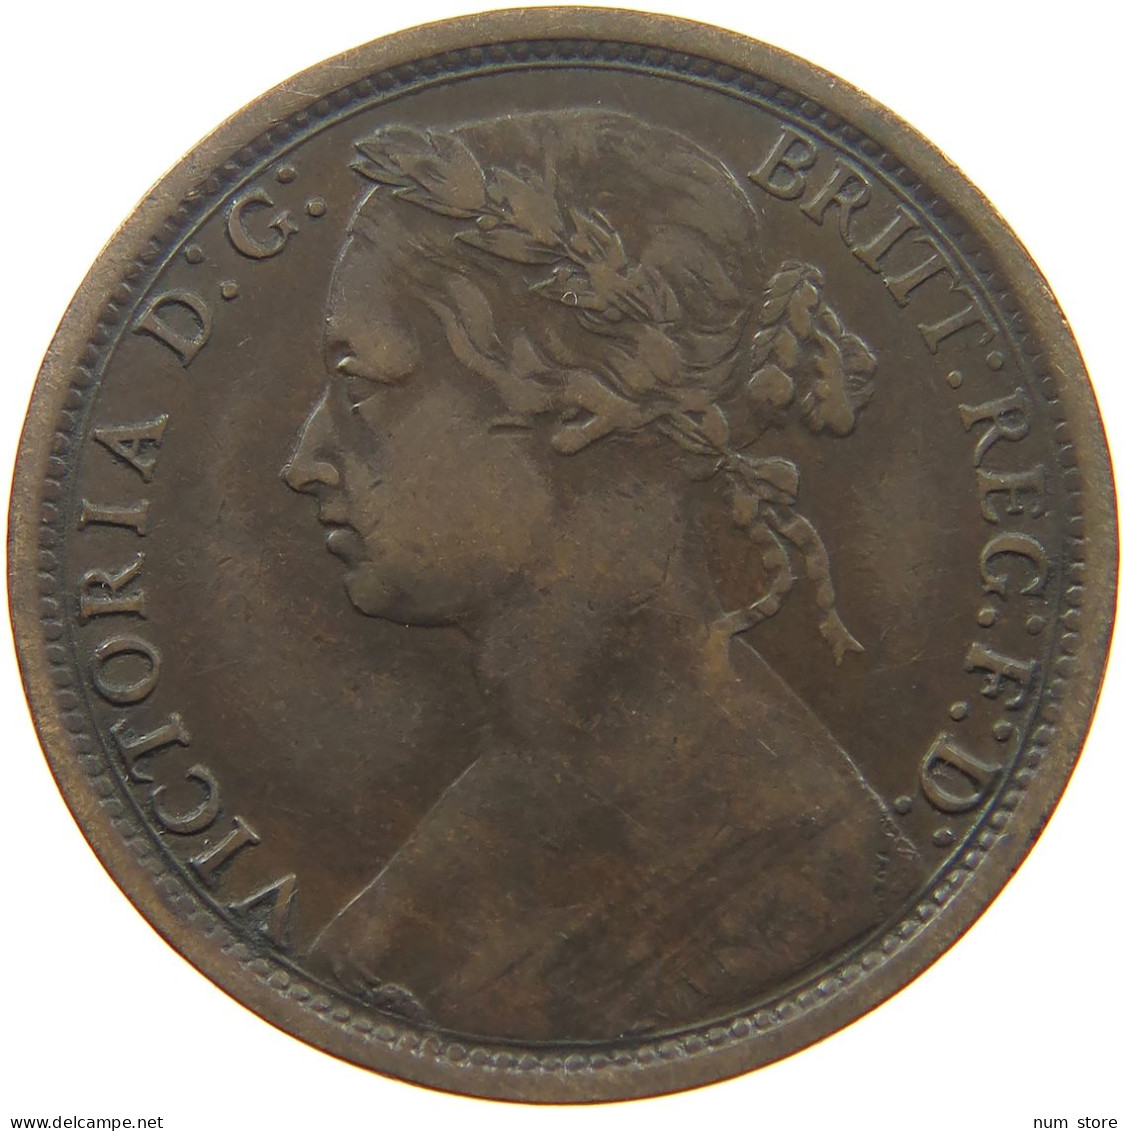 GREAT BRITAIN PENNY 1874 H Victoria 1837-1901 #t001 0021 - D. 1 Penny